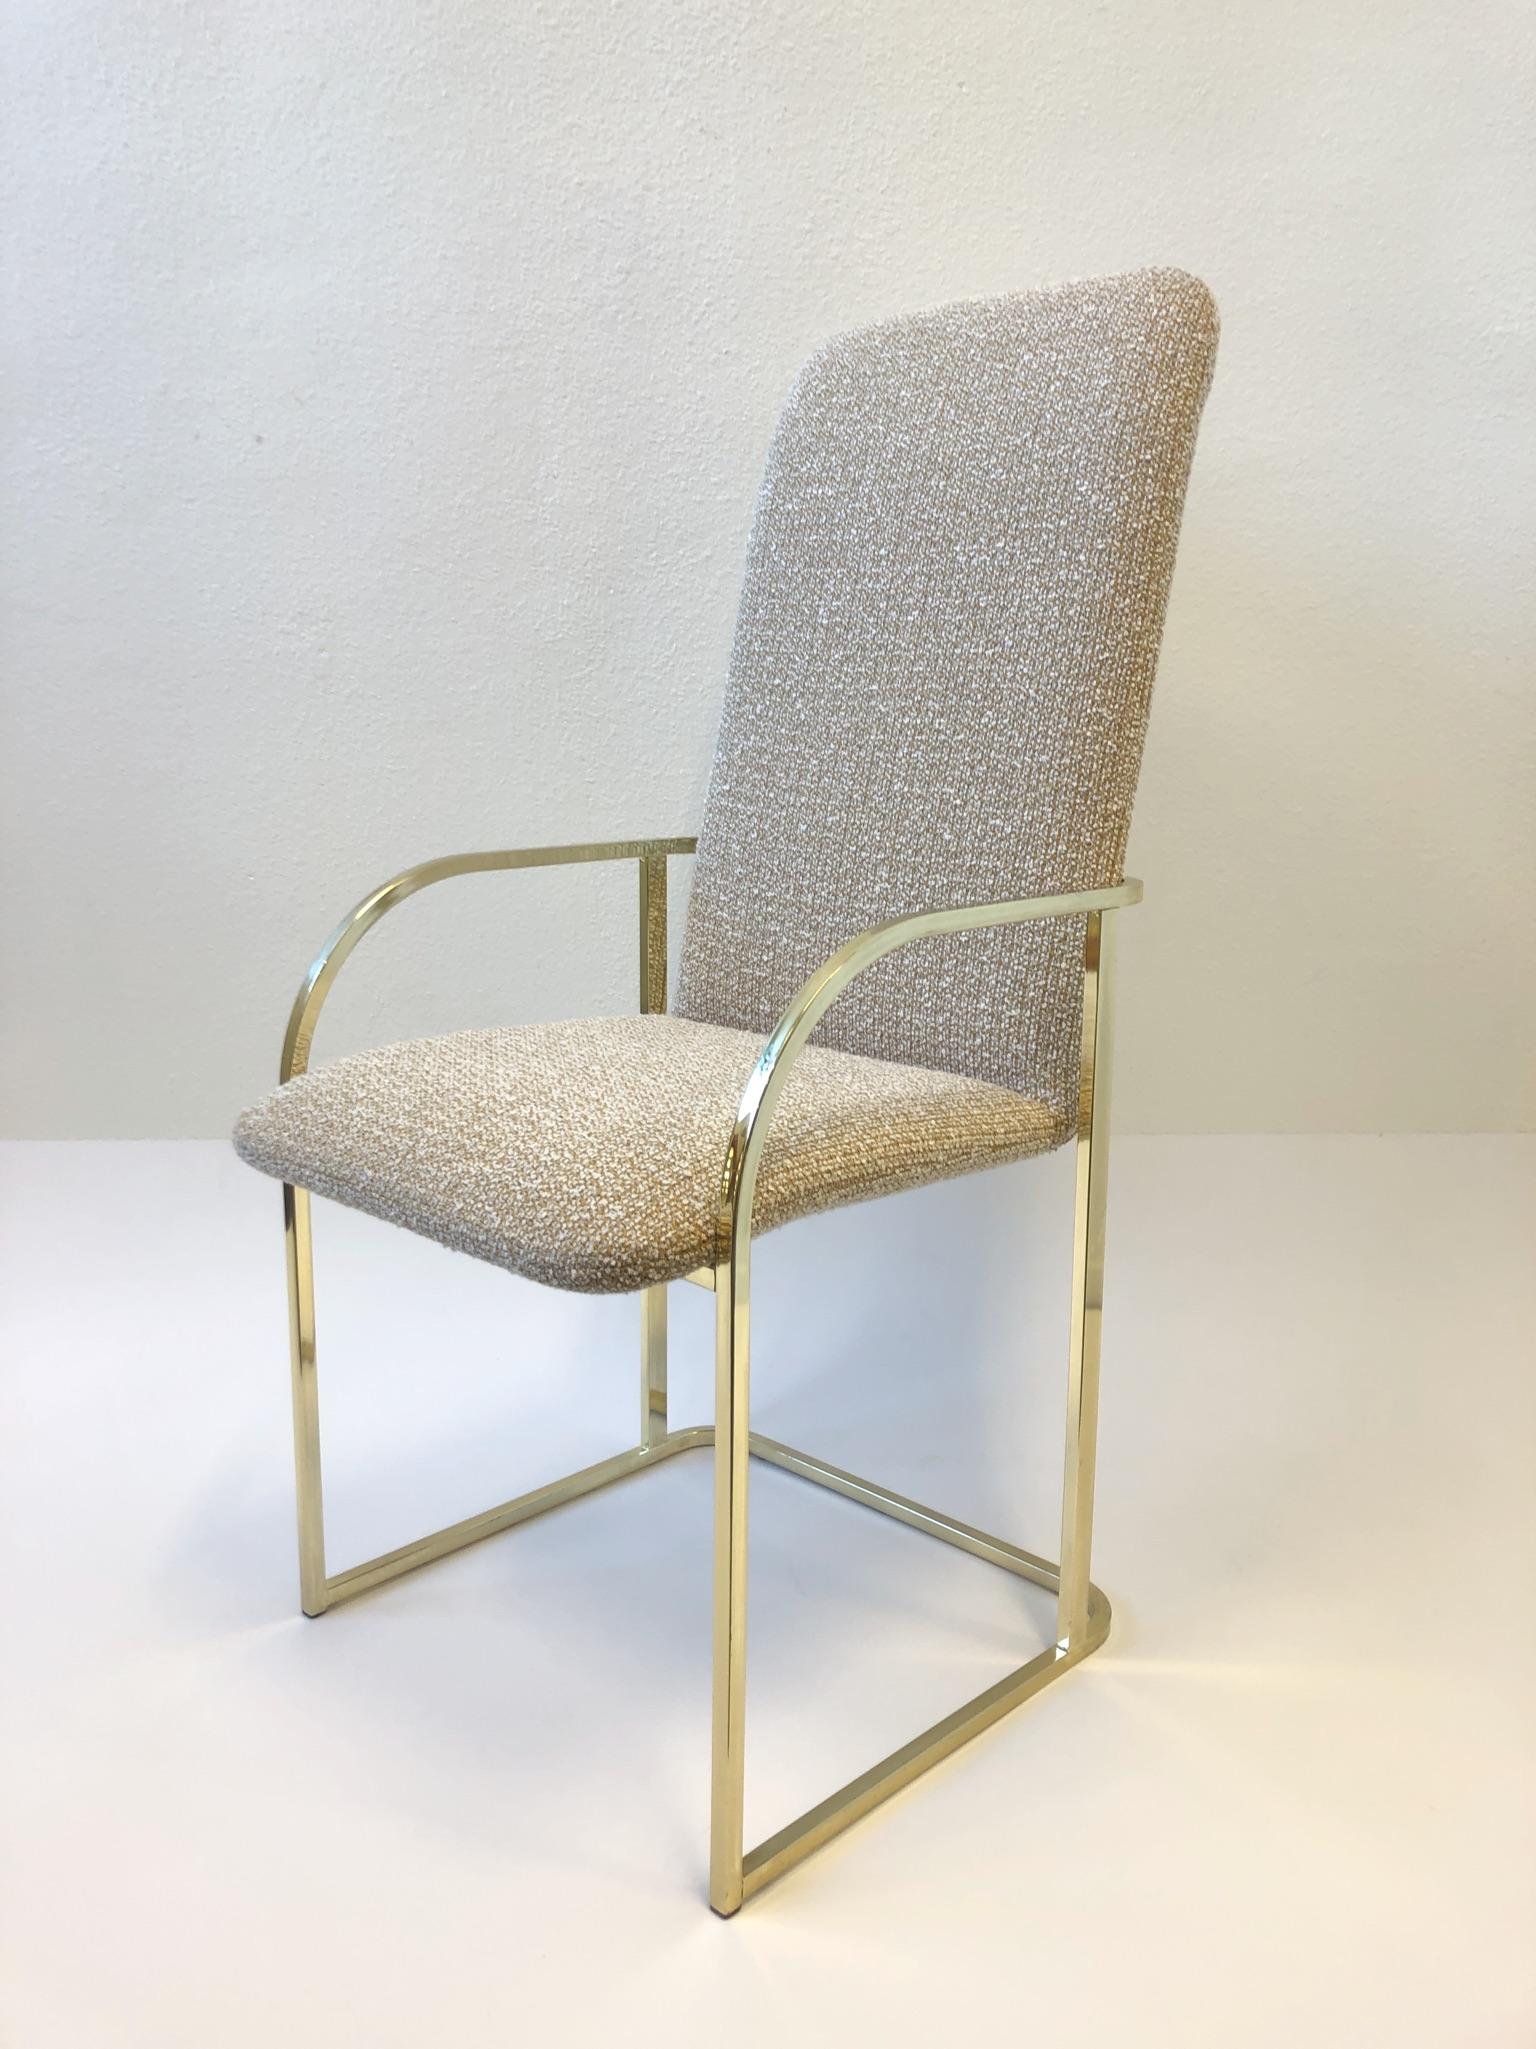 A glamorous set of six polish brass high back dining chairs designed by Design Institute of America. Newly recovered in a beautiful nubby fabric (see detail photos). The brass shows minor wear. 

Dimension: 44” high, 25” arm, 19.5” seat, 27” deep,